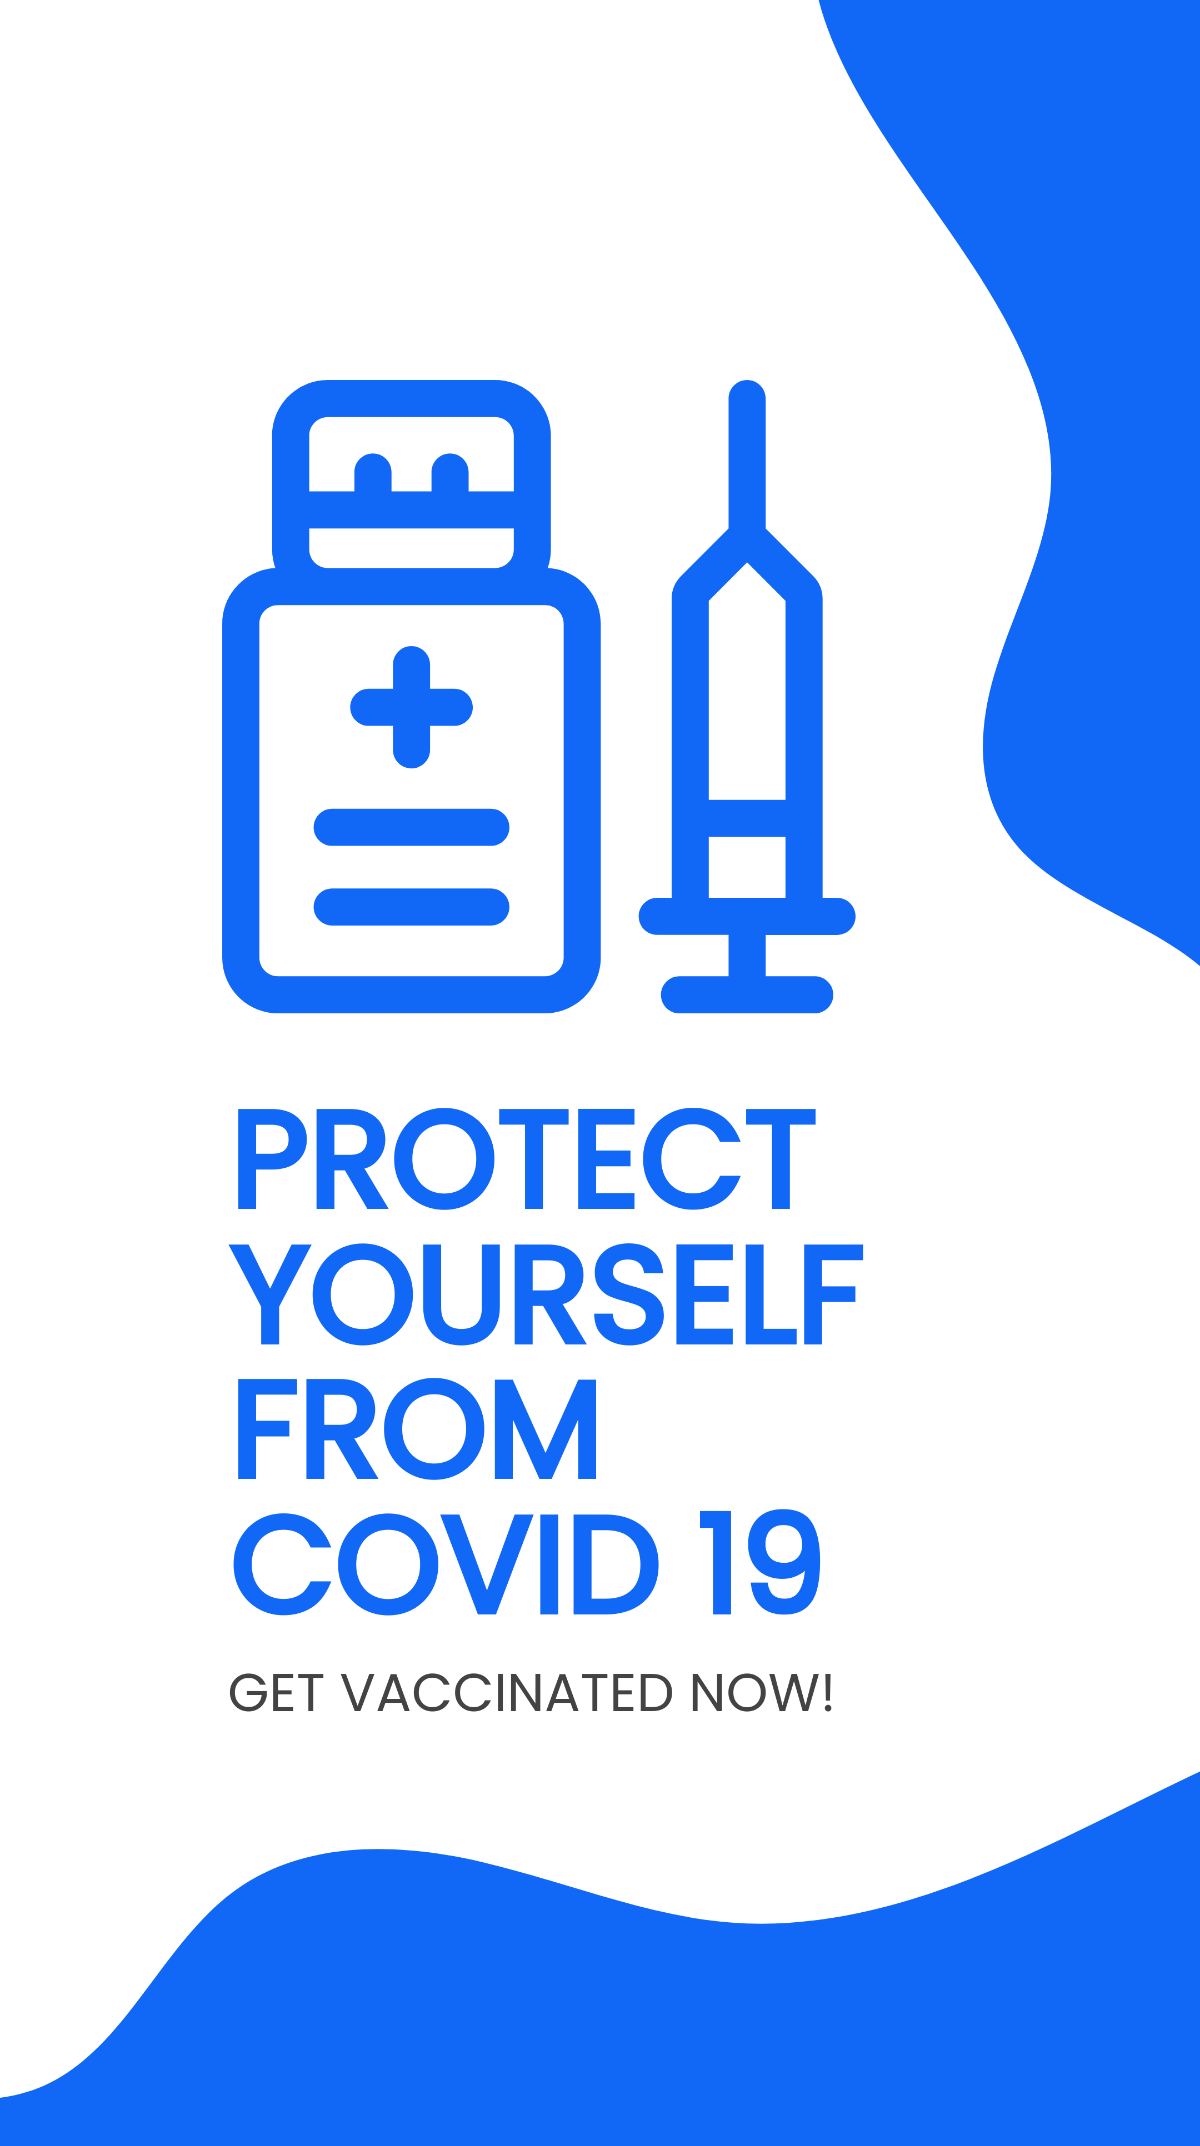 Free Covid 19 Vaccine Available Whatsapp Post Template